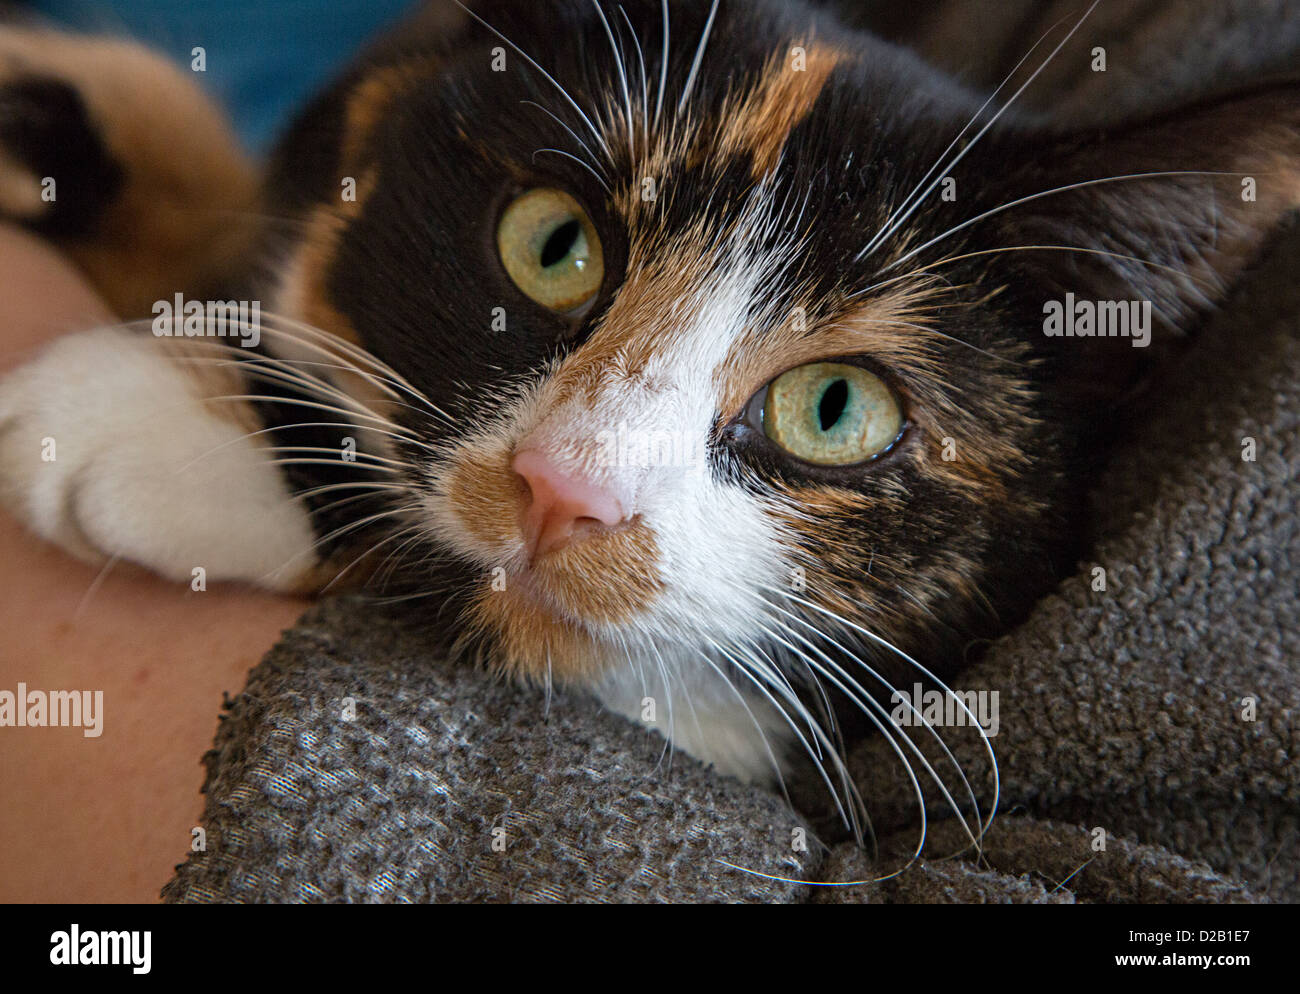 Tortoiseshell cat being held with head looking over arm, UK Stock Photo